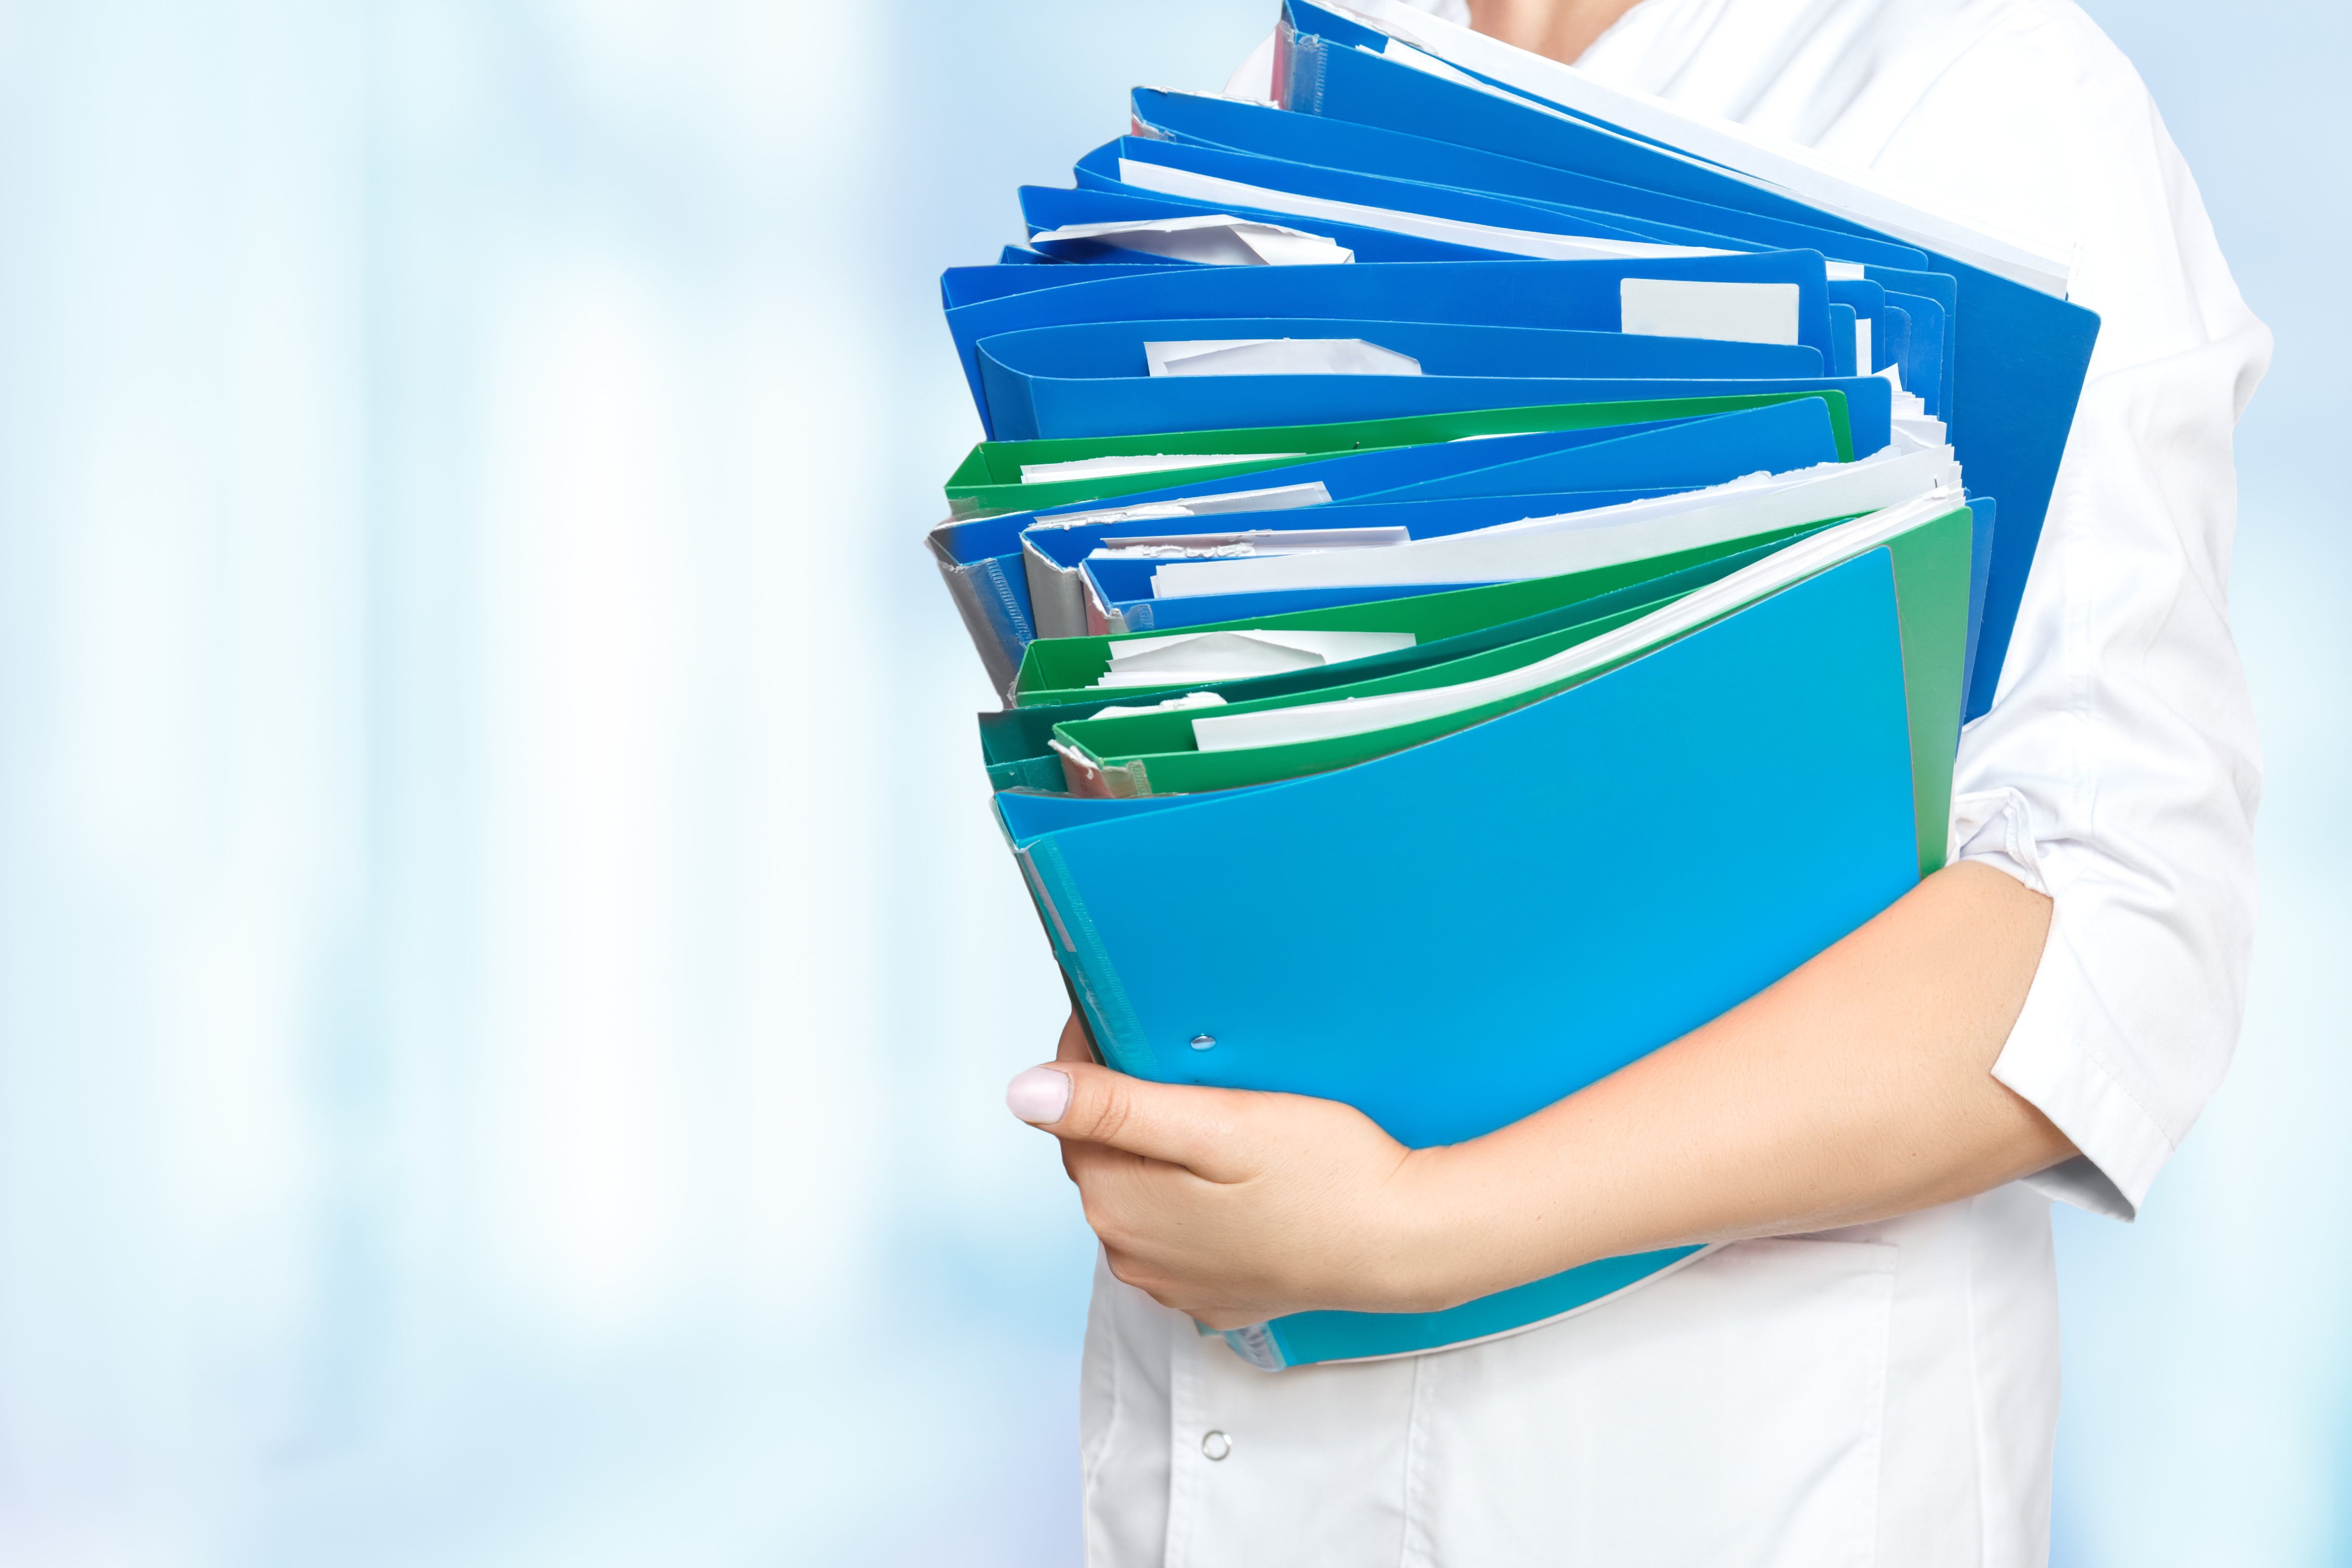 The Clinical Documentation Process has Become Longer, More Repetitive, and Less Informative